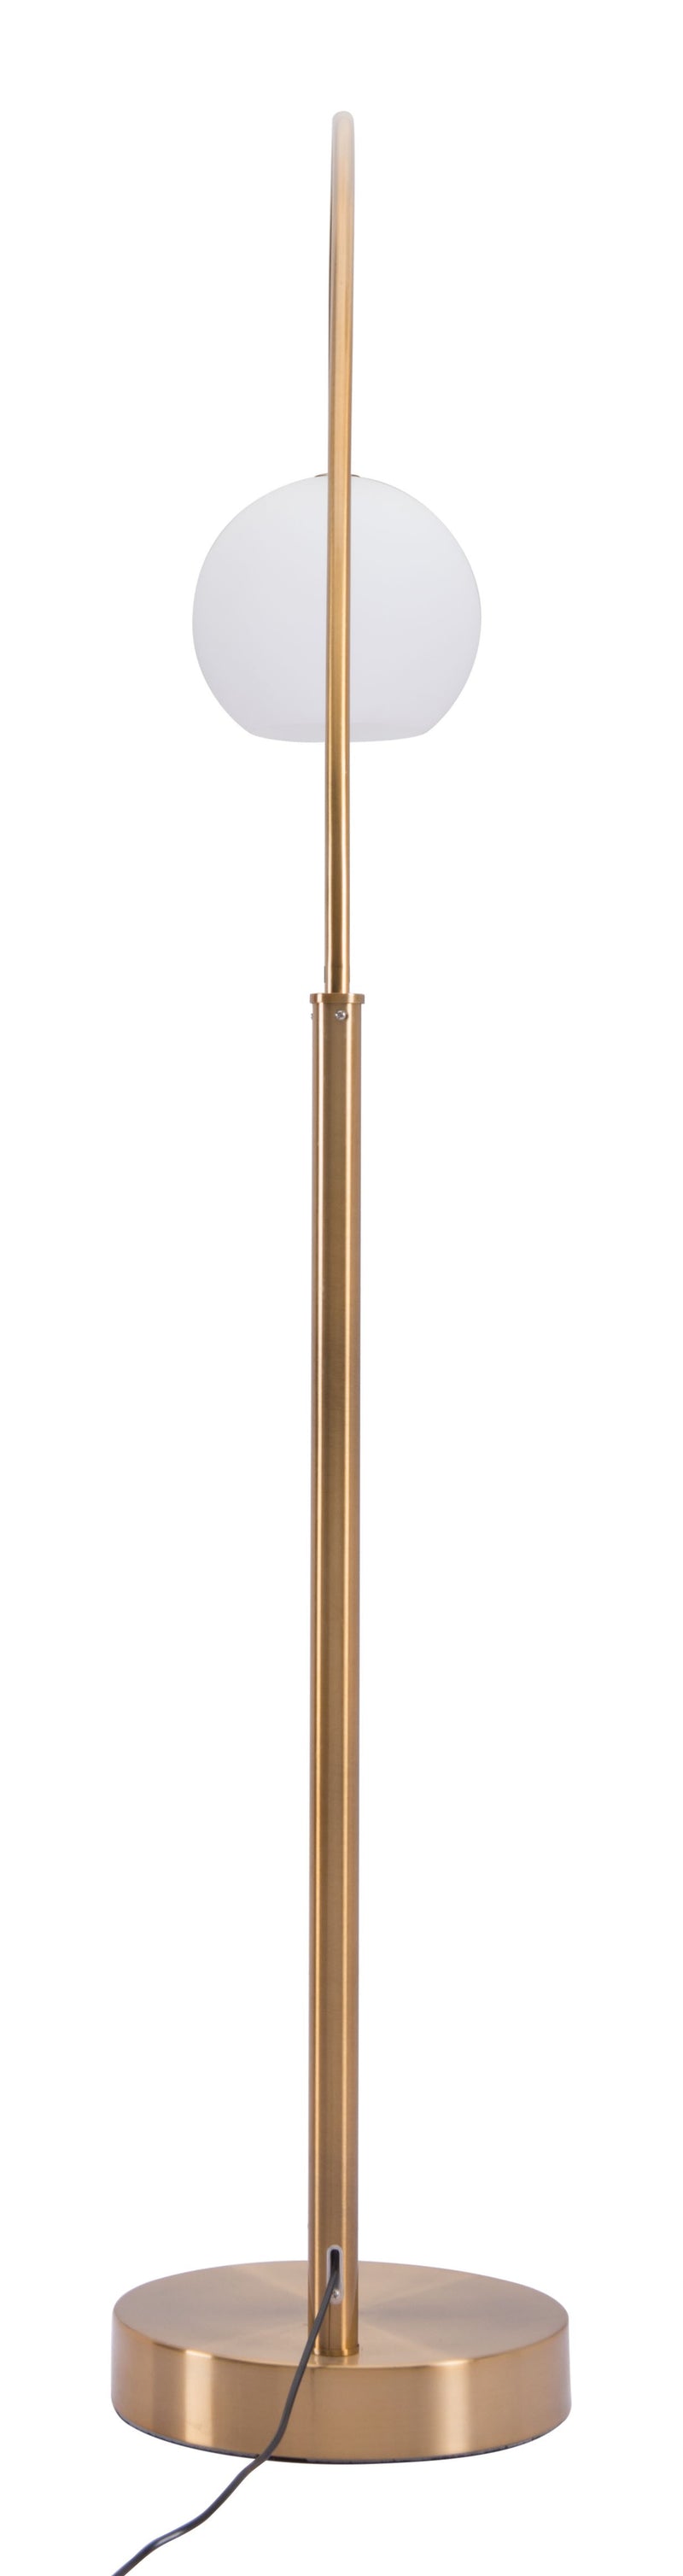 Home Outfitters Brushed Brass Modern Arc Floor Lamp